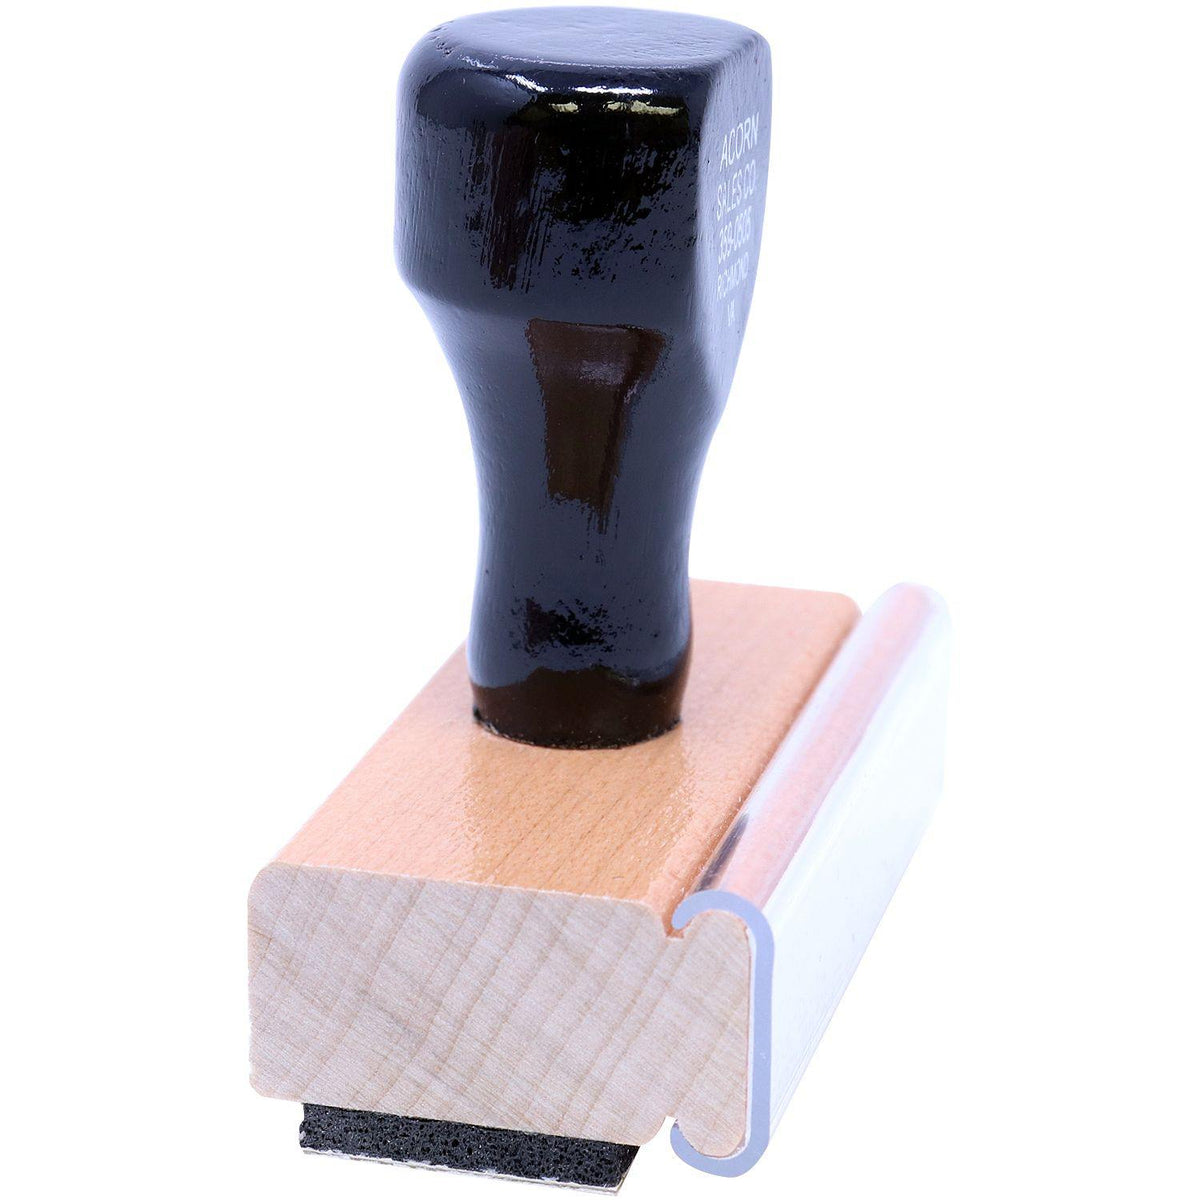 Side View of Bold Rough Draft Rubber Stamp at an Angle